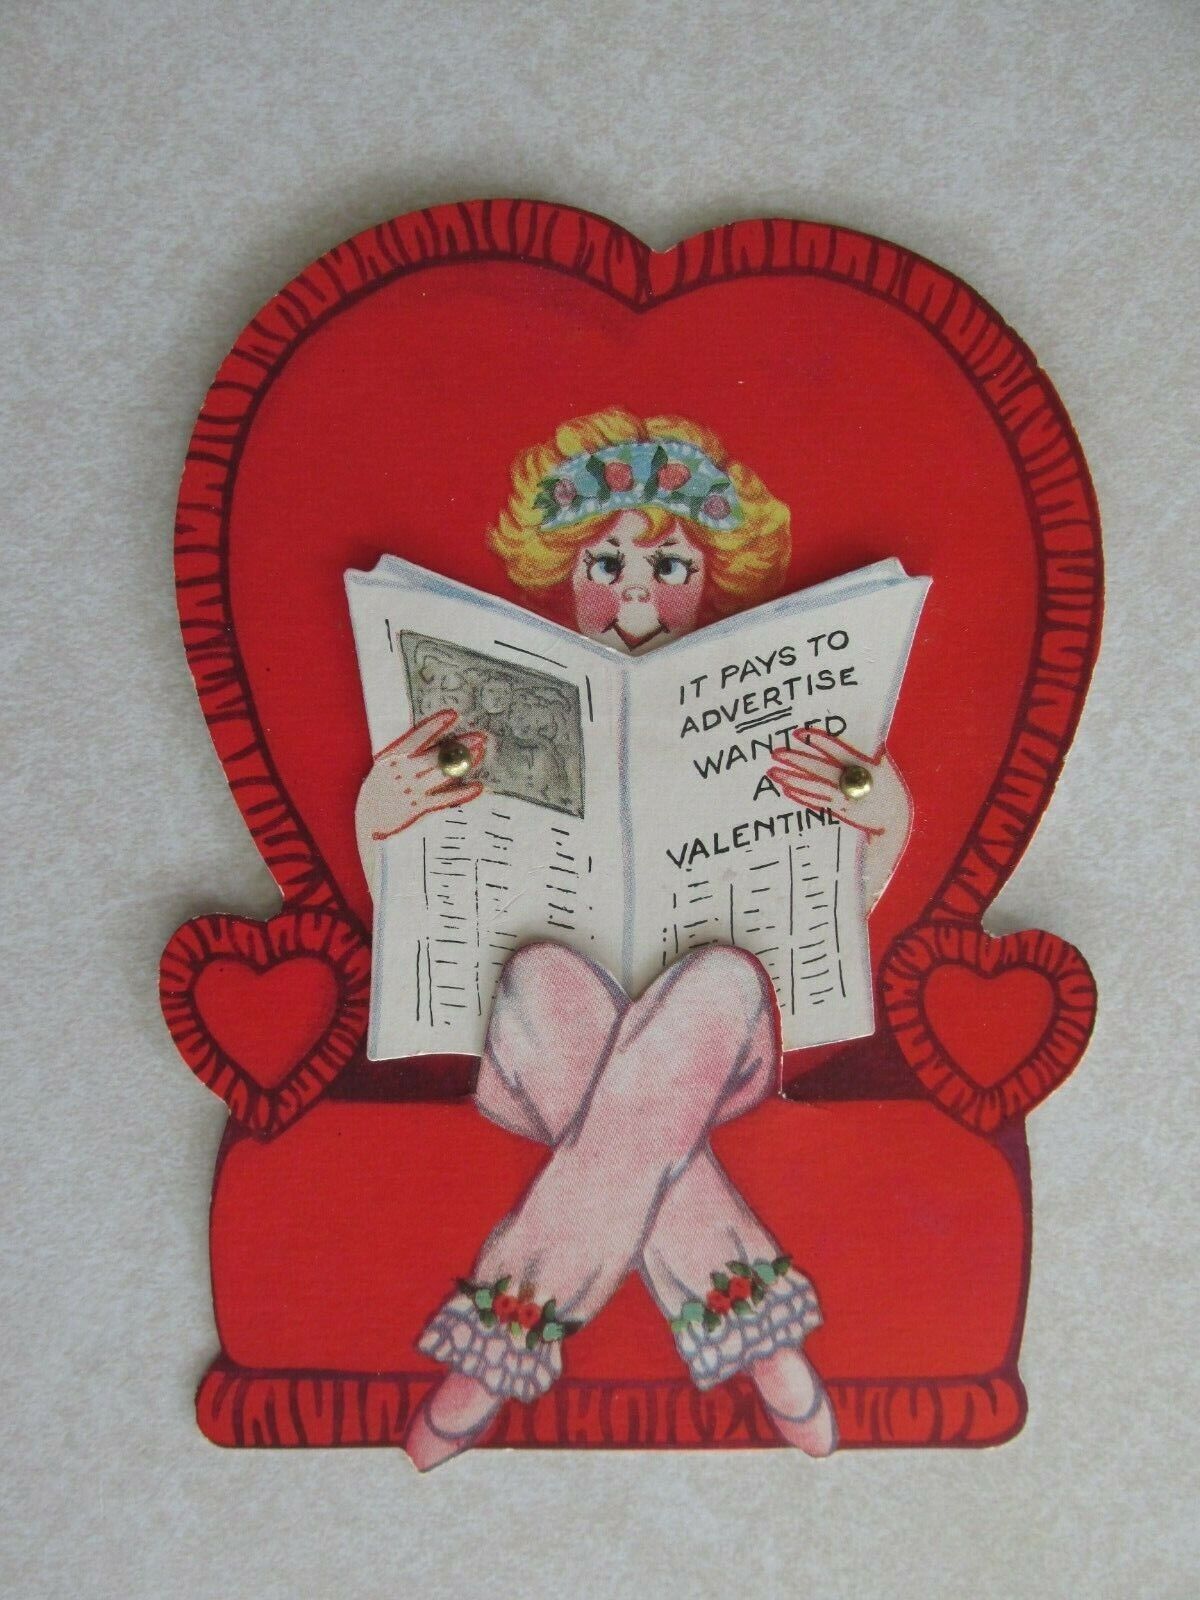 PP50 Valentines day card Wanted It pays to advertise a valentine lady Mechanical